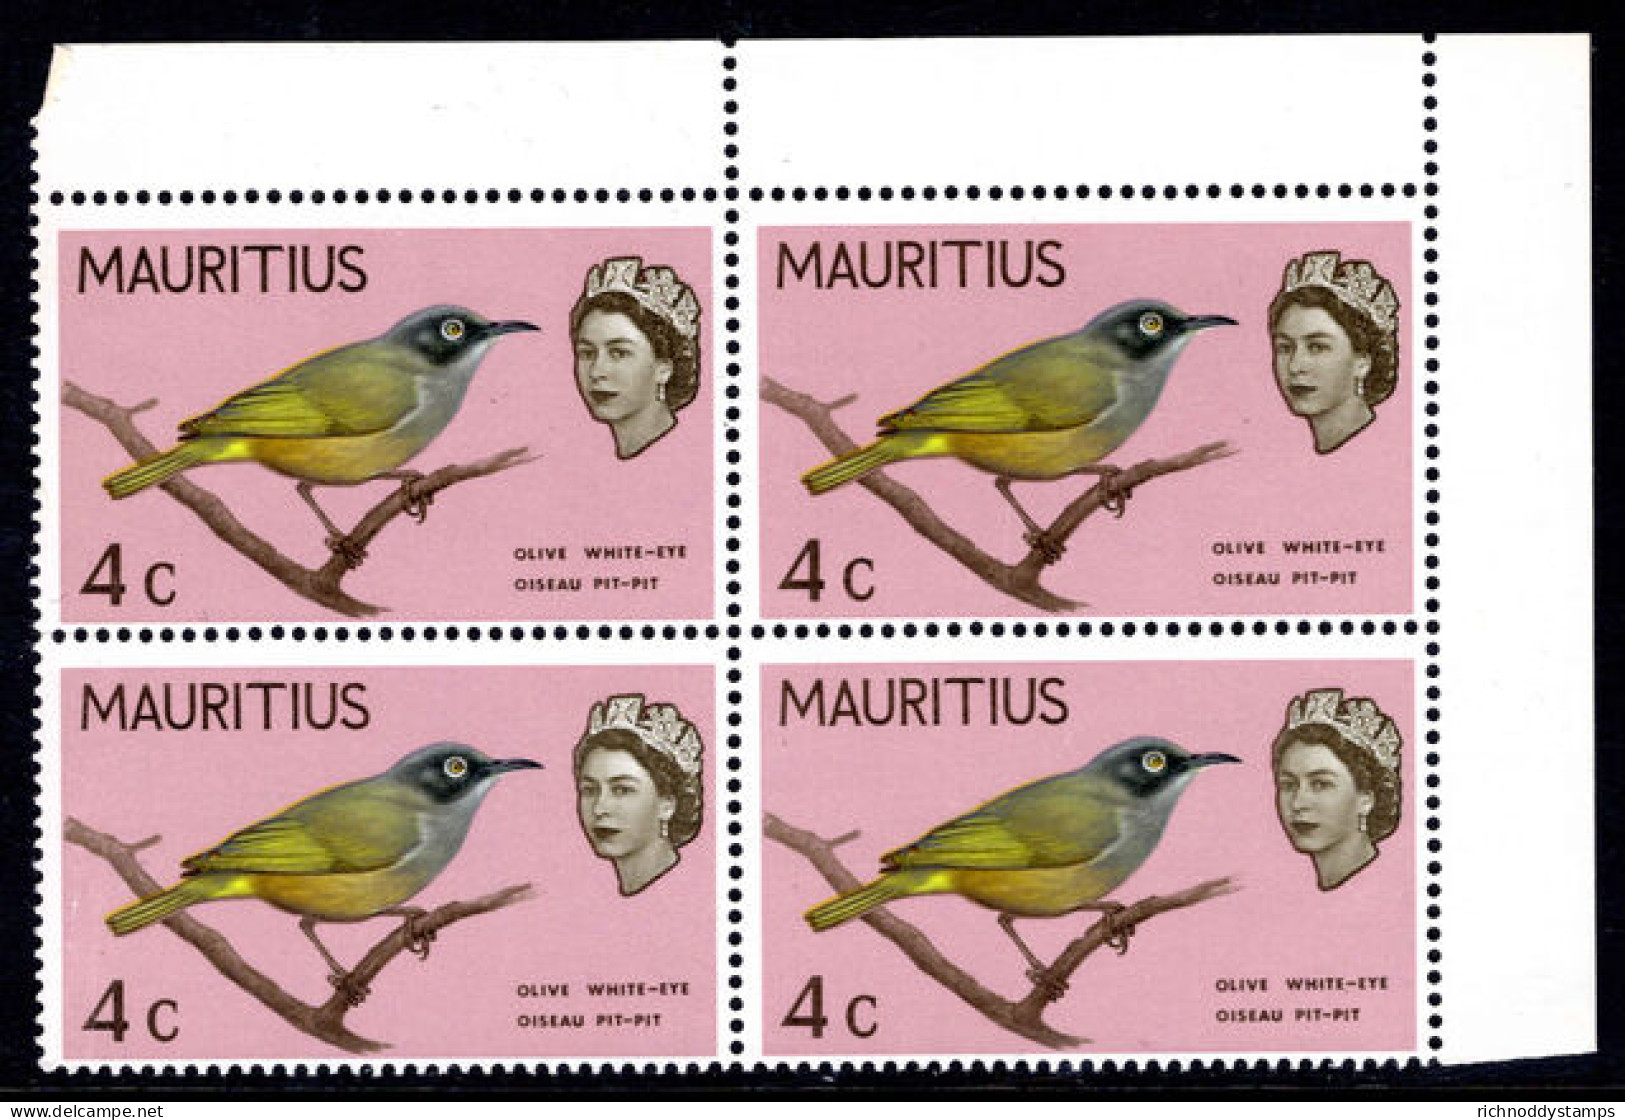 Mauritius 1965 4c With Minor Variety Nicked Branch Block Of 4 Unmounted Mint. - Mauritius (1968-...)